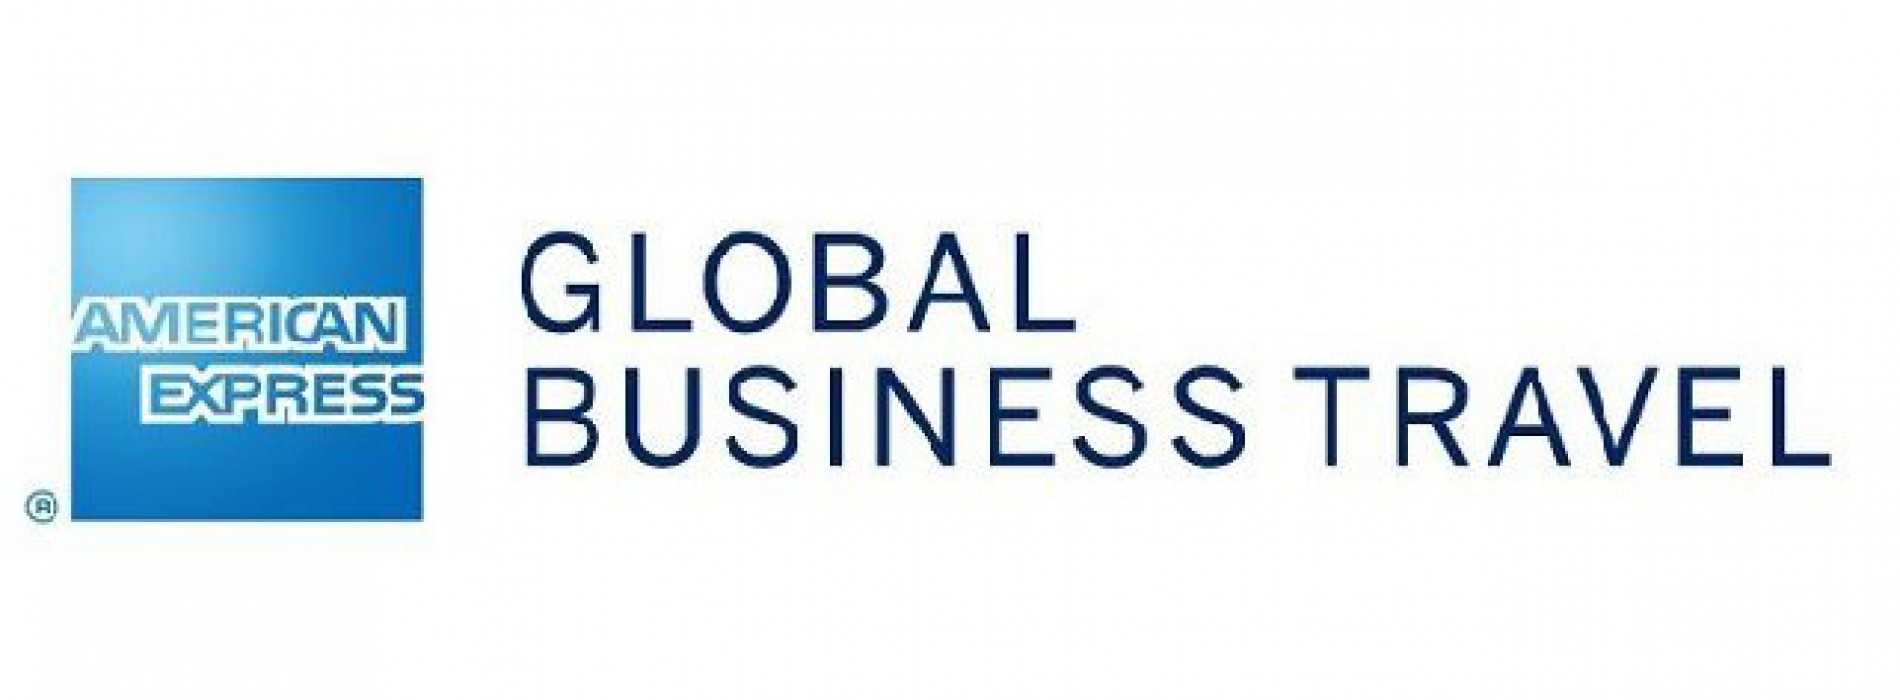 American Express Global Business Travel Completes Acquisition of Hogg Robinson Group